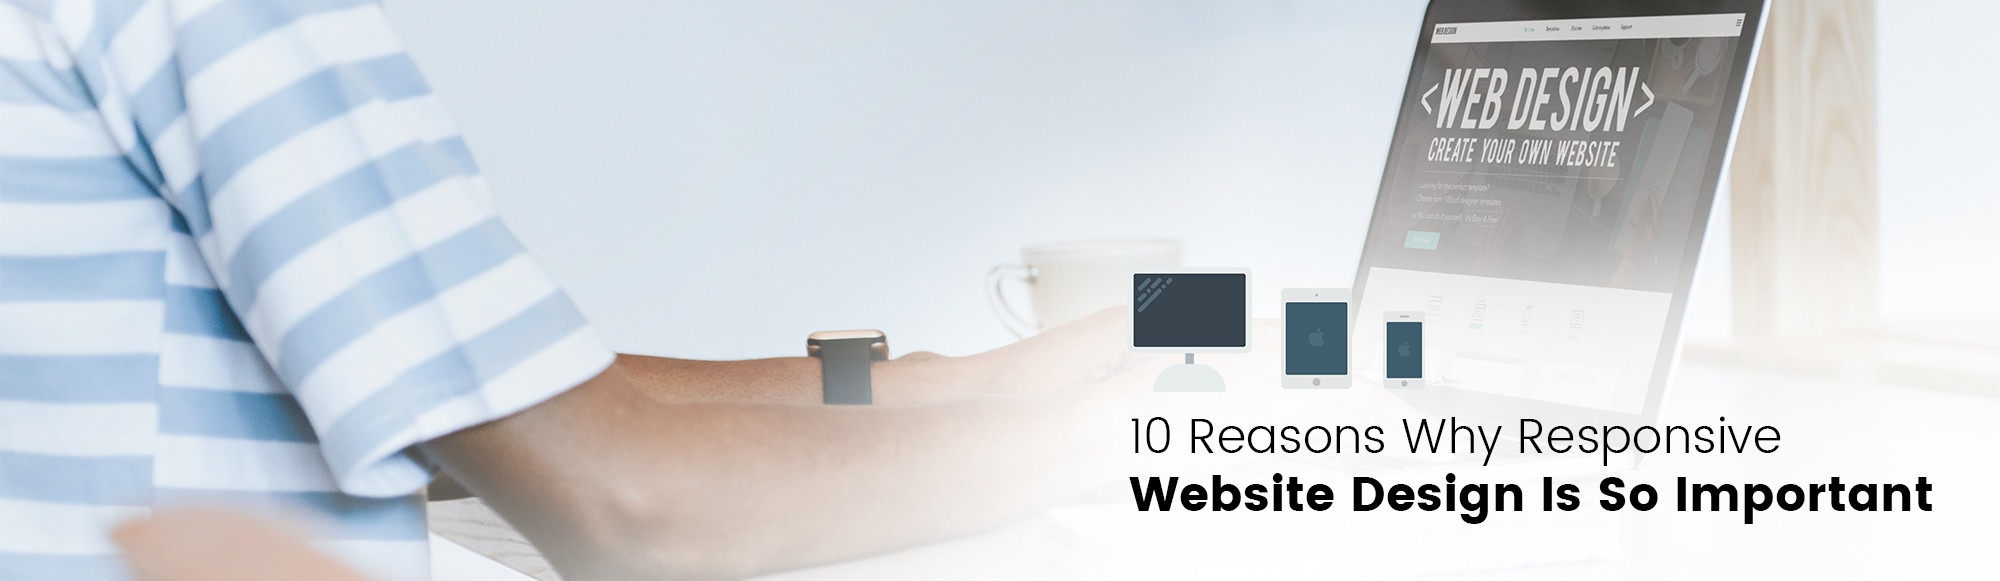 10 reasons why responsive website design is so important